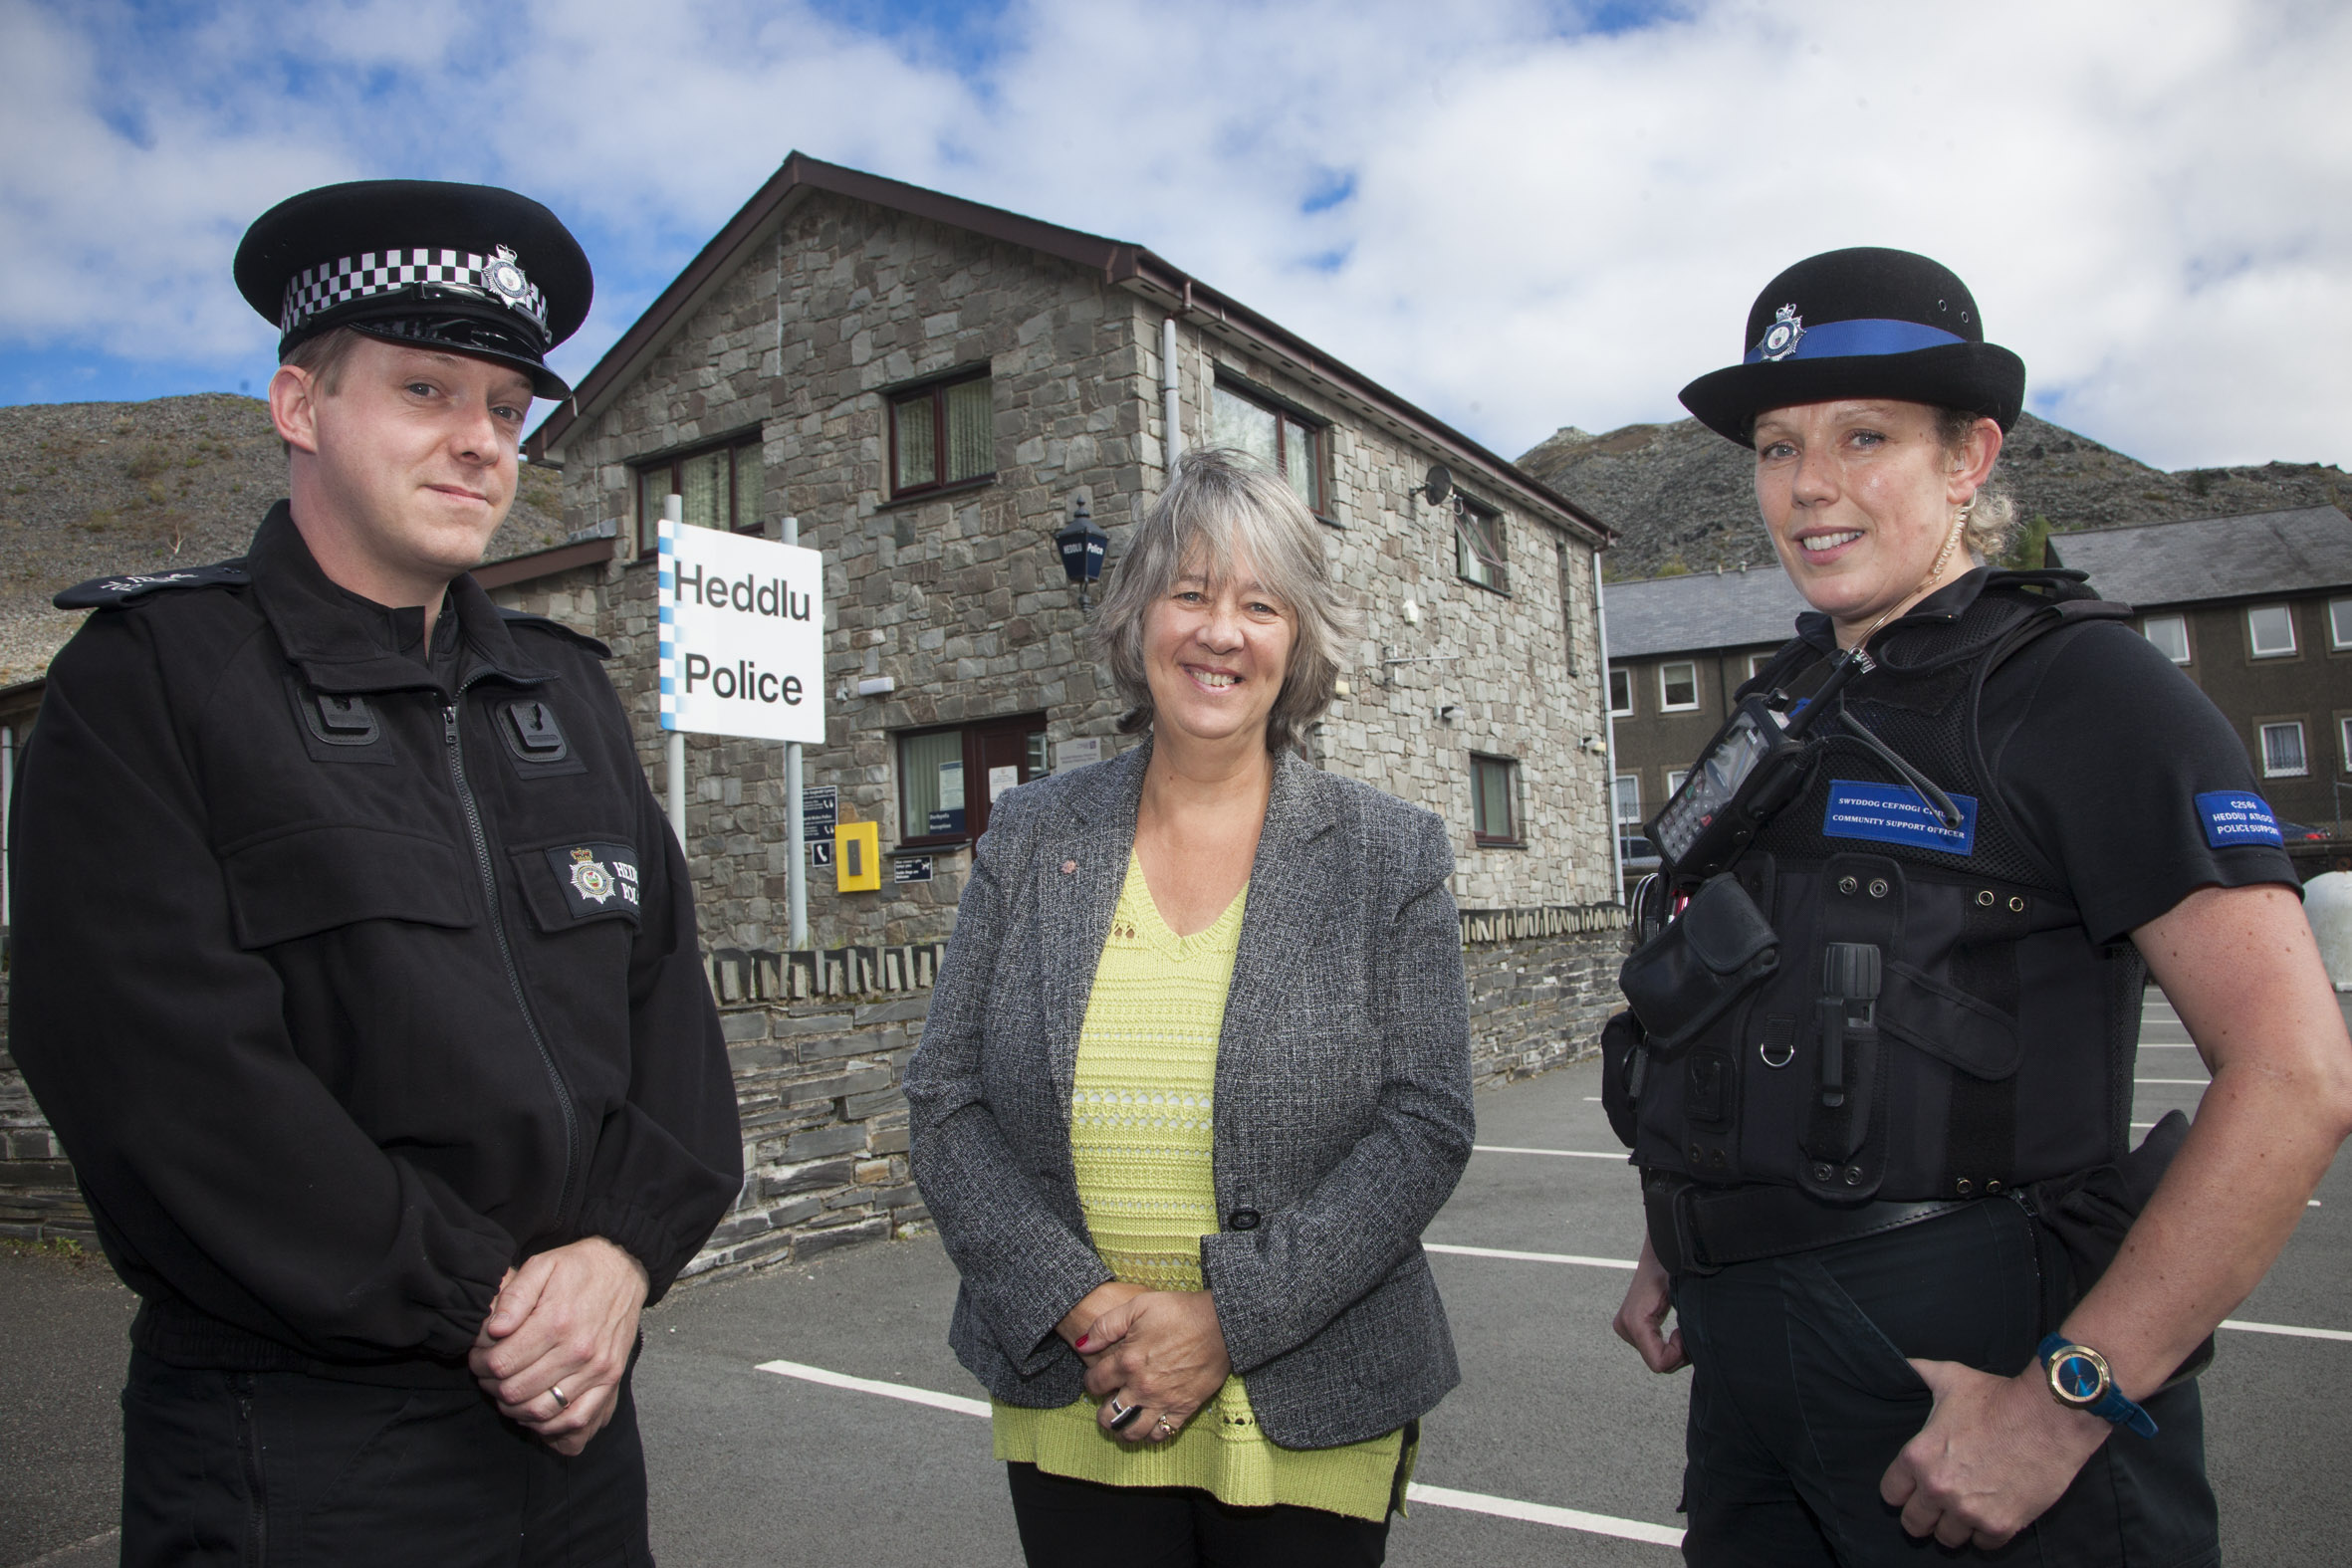 New plan to recruit police officers in South Gwynedd